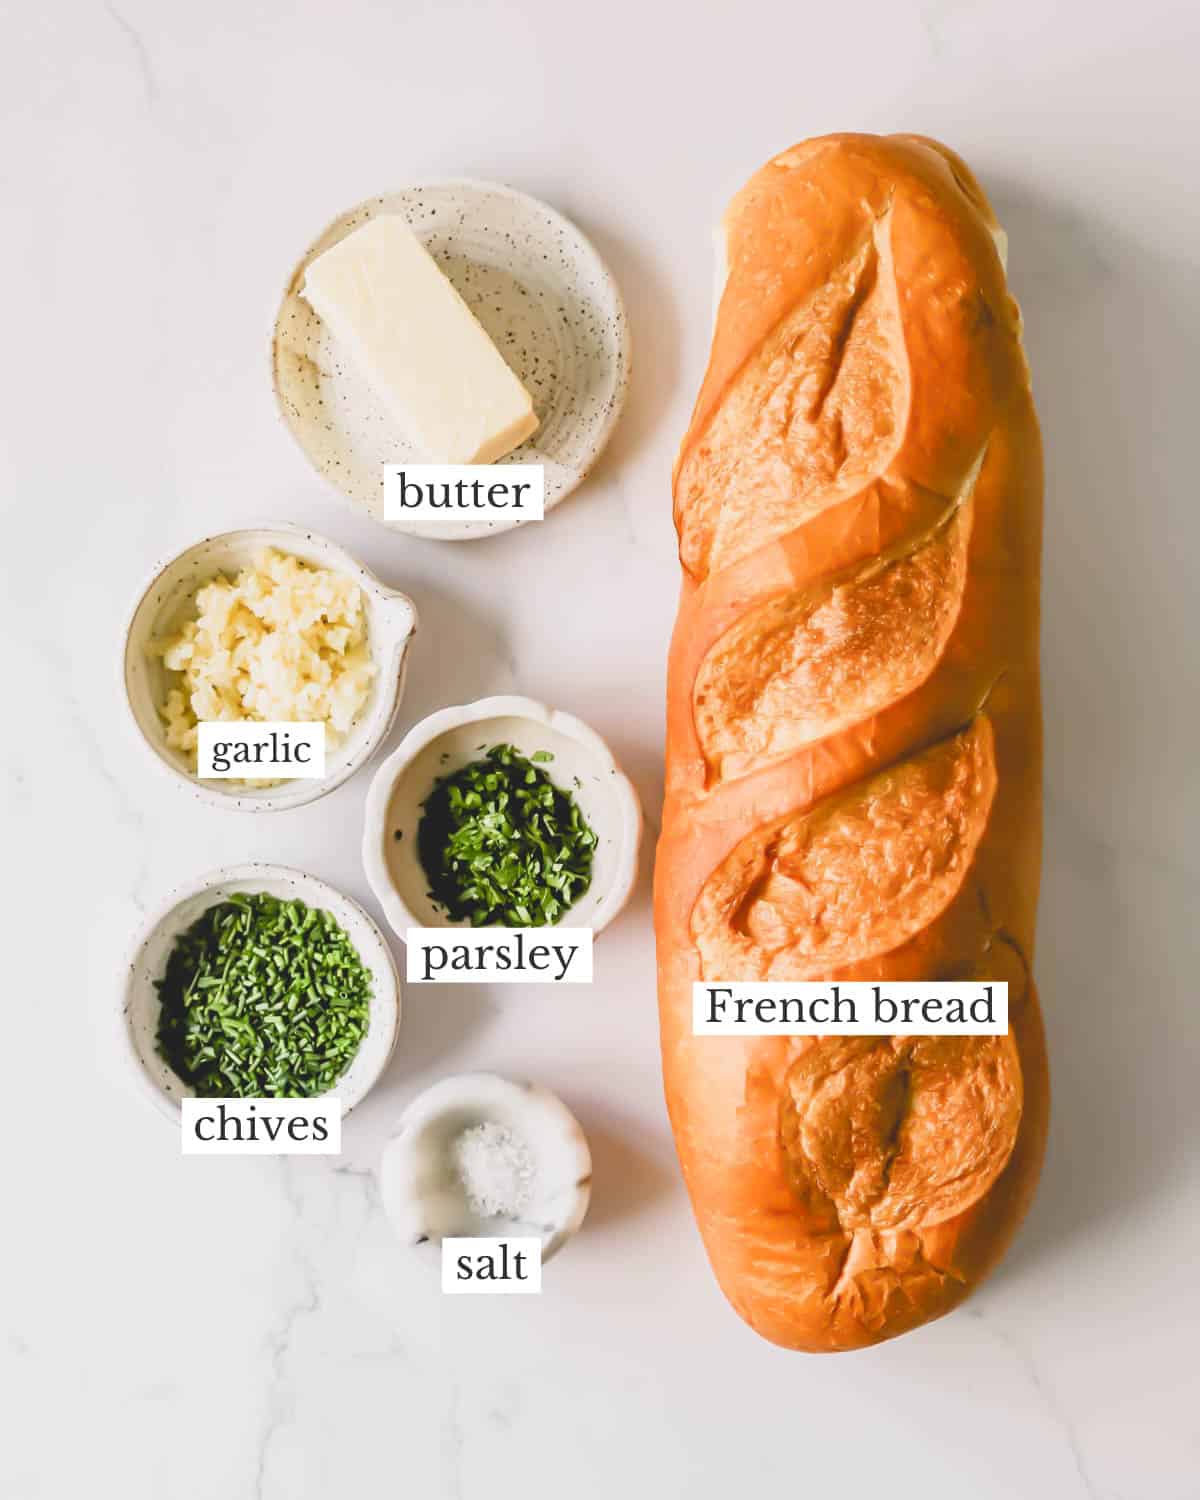 Ingredients needed to make homemade garlic bread with an herbed butter spread.